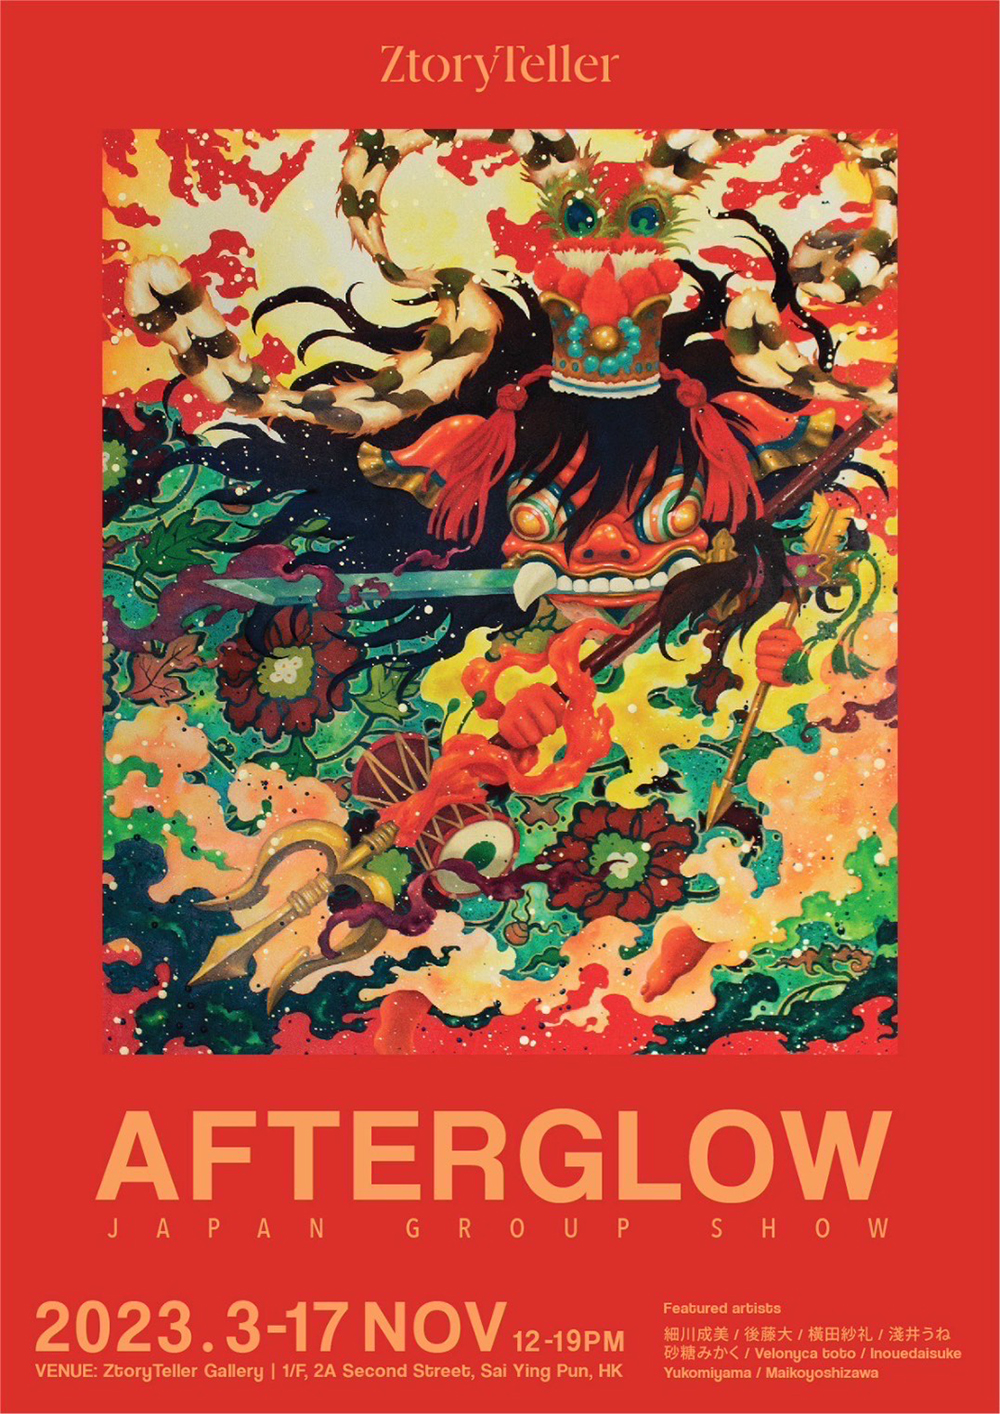 AFTERGLOW